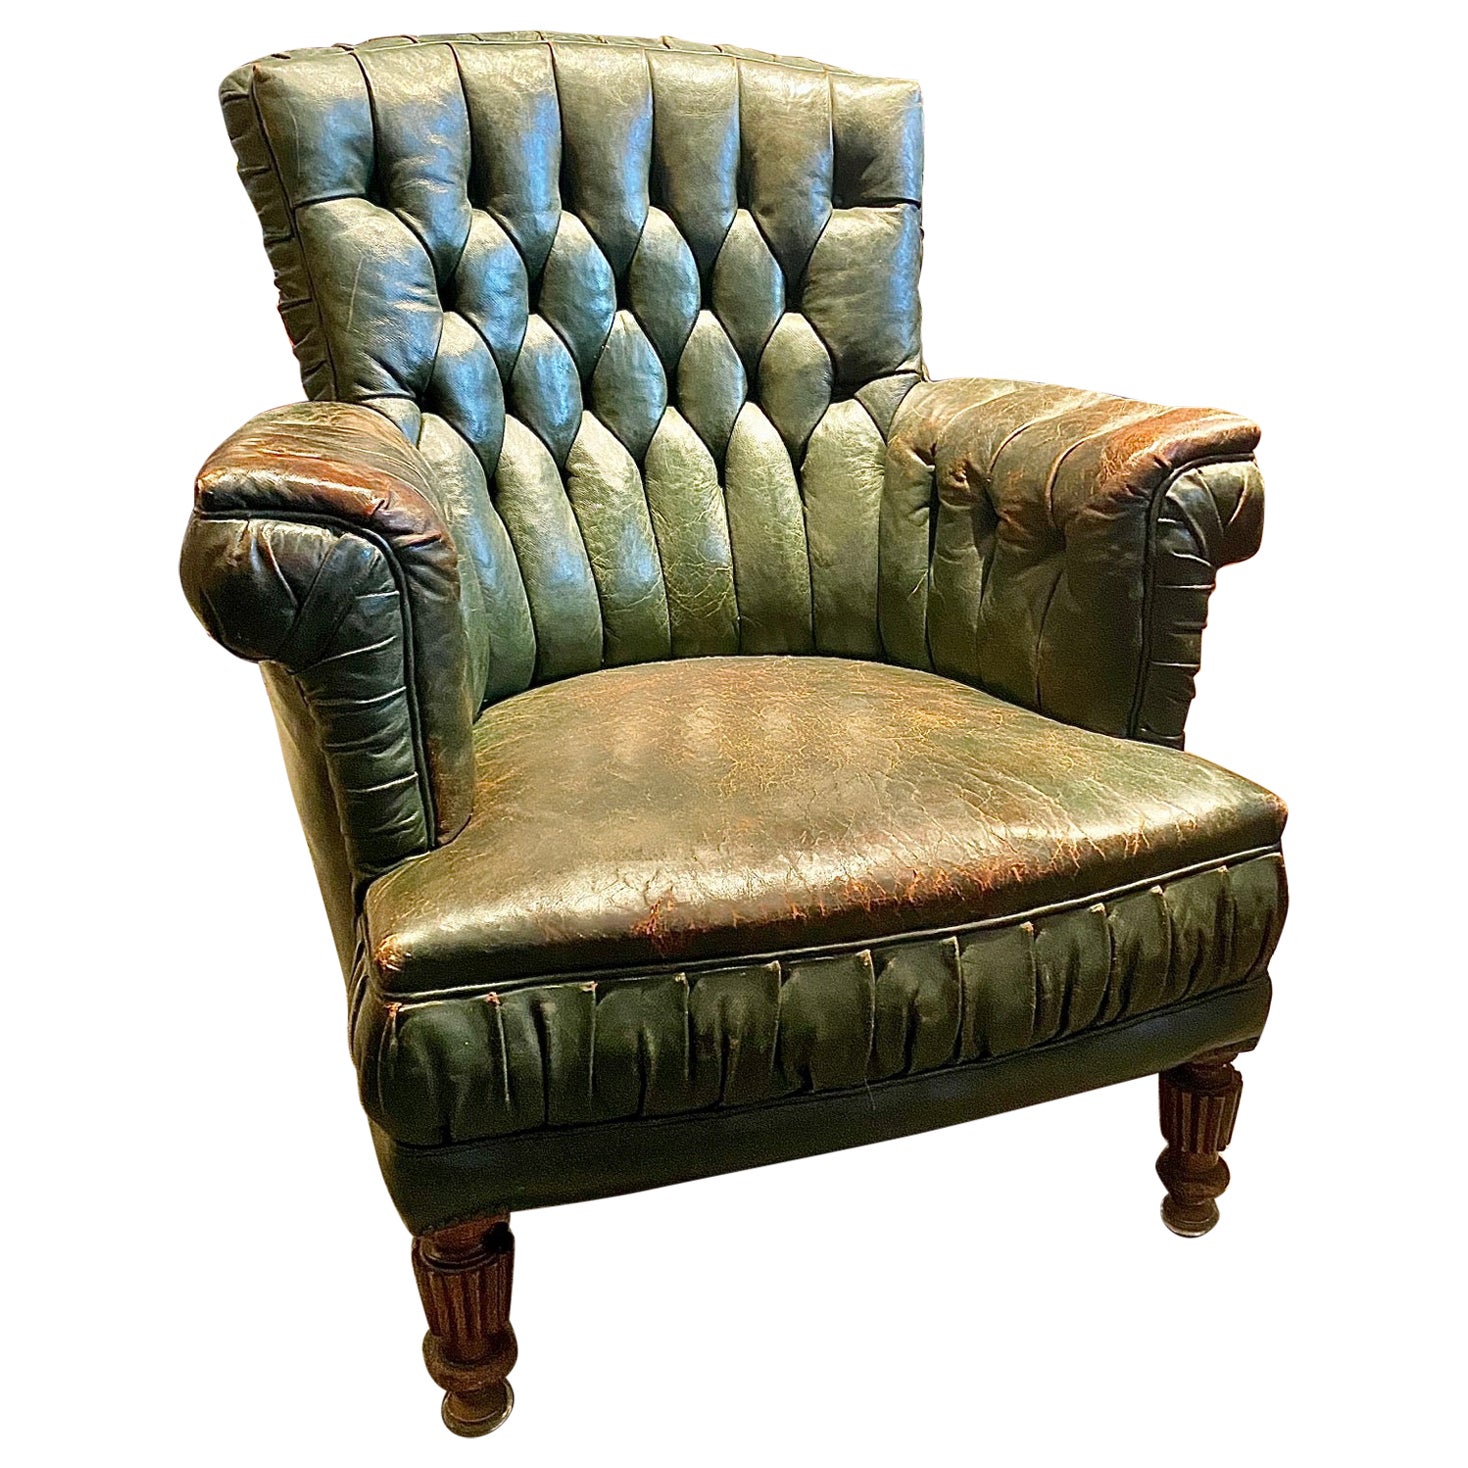 English Tufted Green Leather Library Armchair